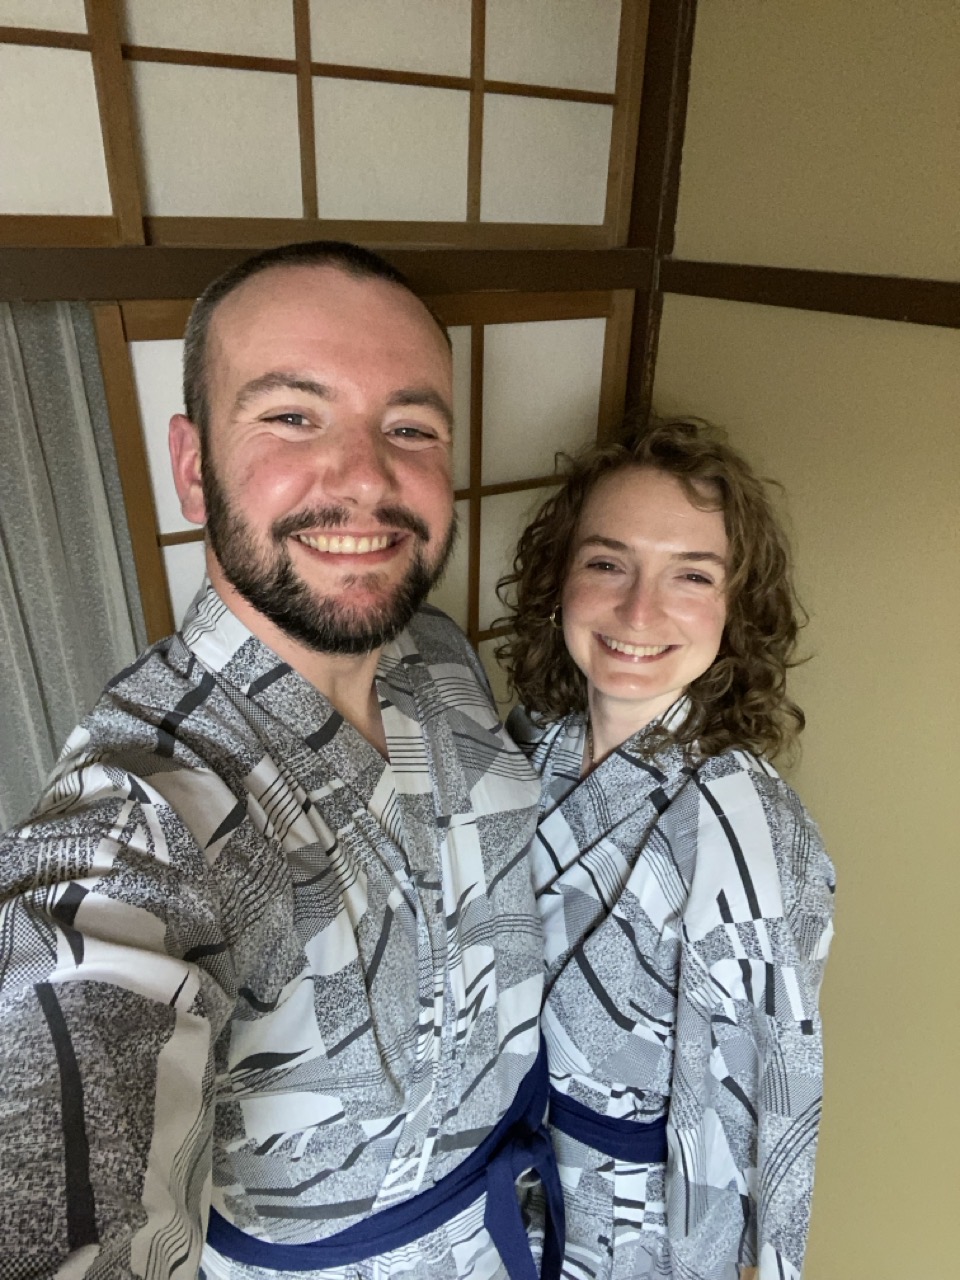 Lucy and me grinning in our grey and white yukata